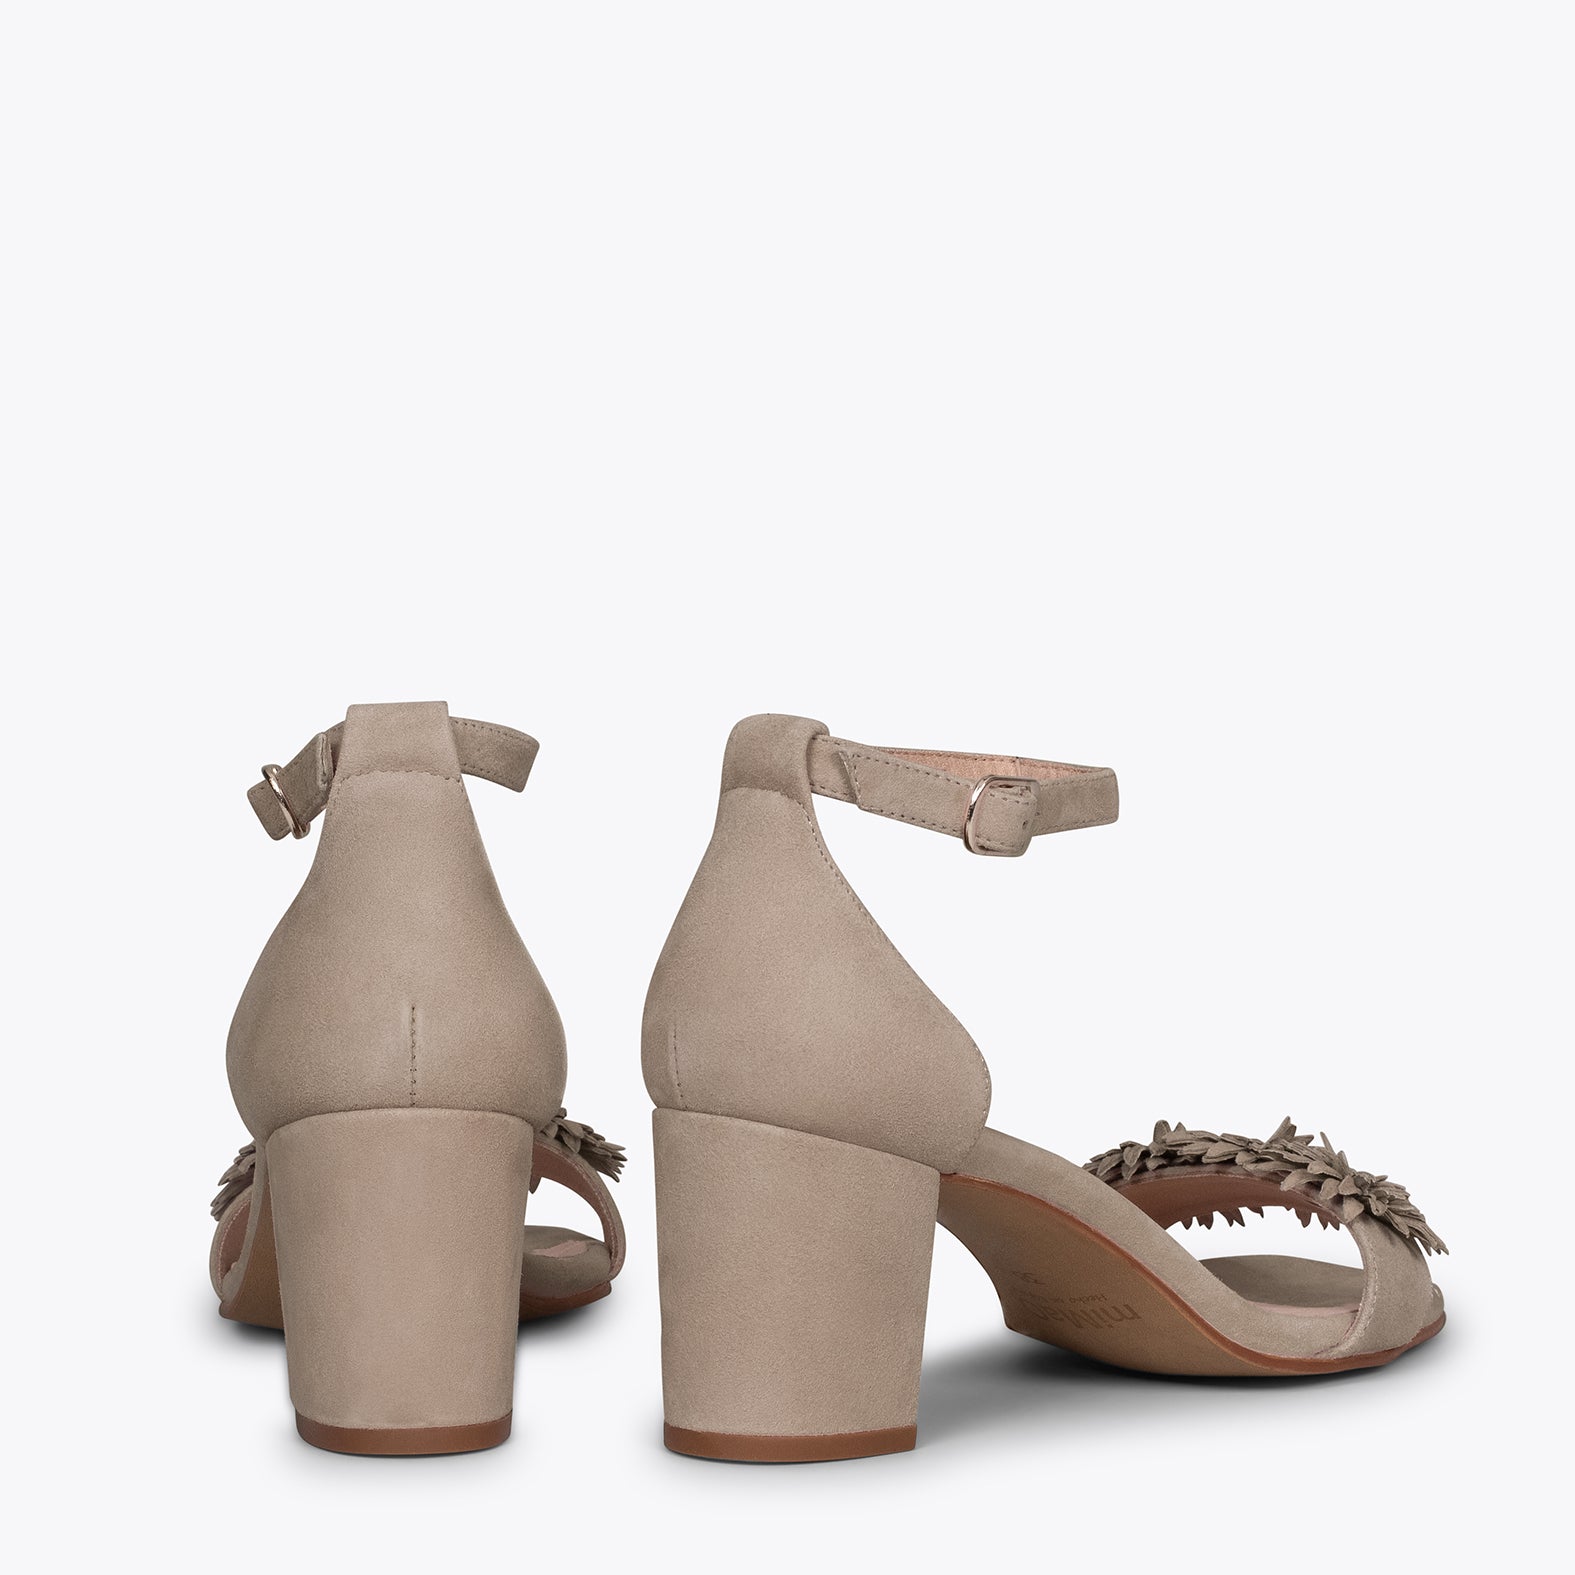 ZINNIA – TAUPE sandals with pompom details